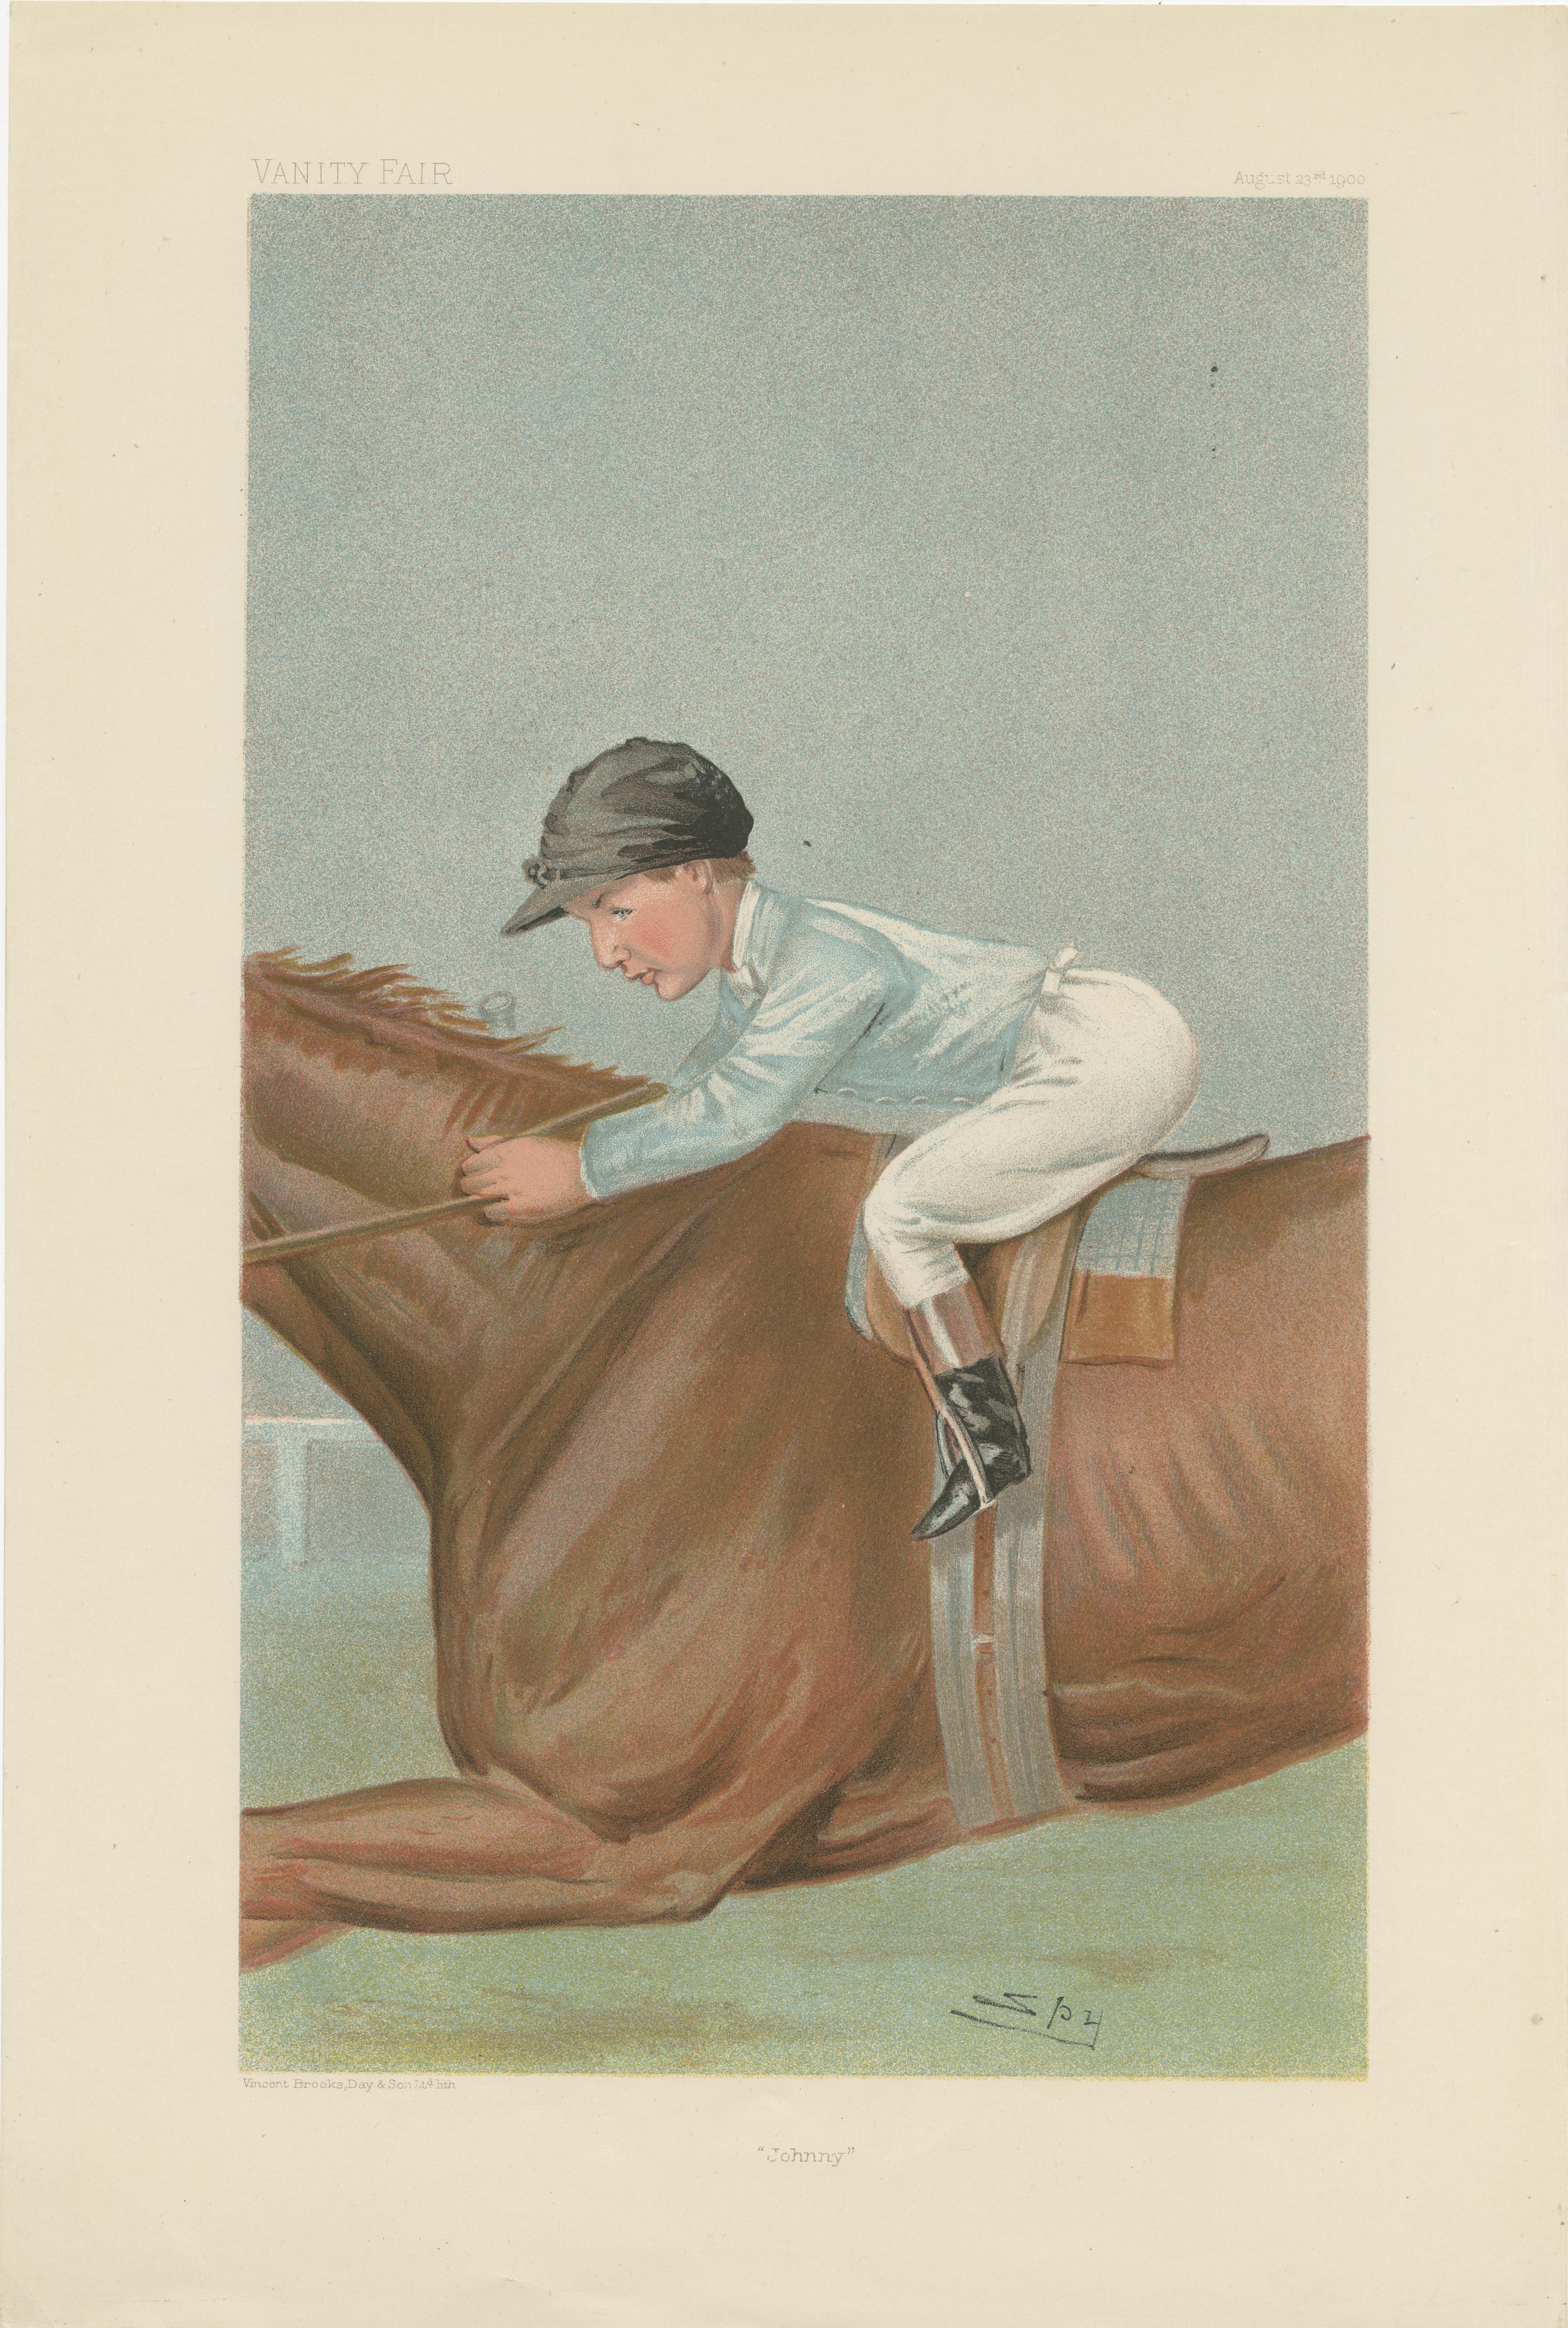 Chromolithograph titled 'Johnny' Lithograph of John Reiff. This print originates from 'Vanity Fair'. Published 1900.